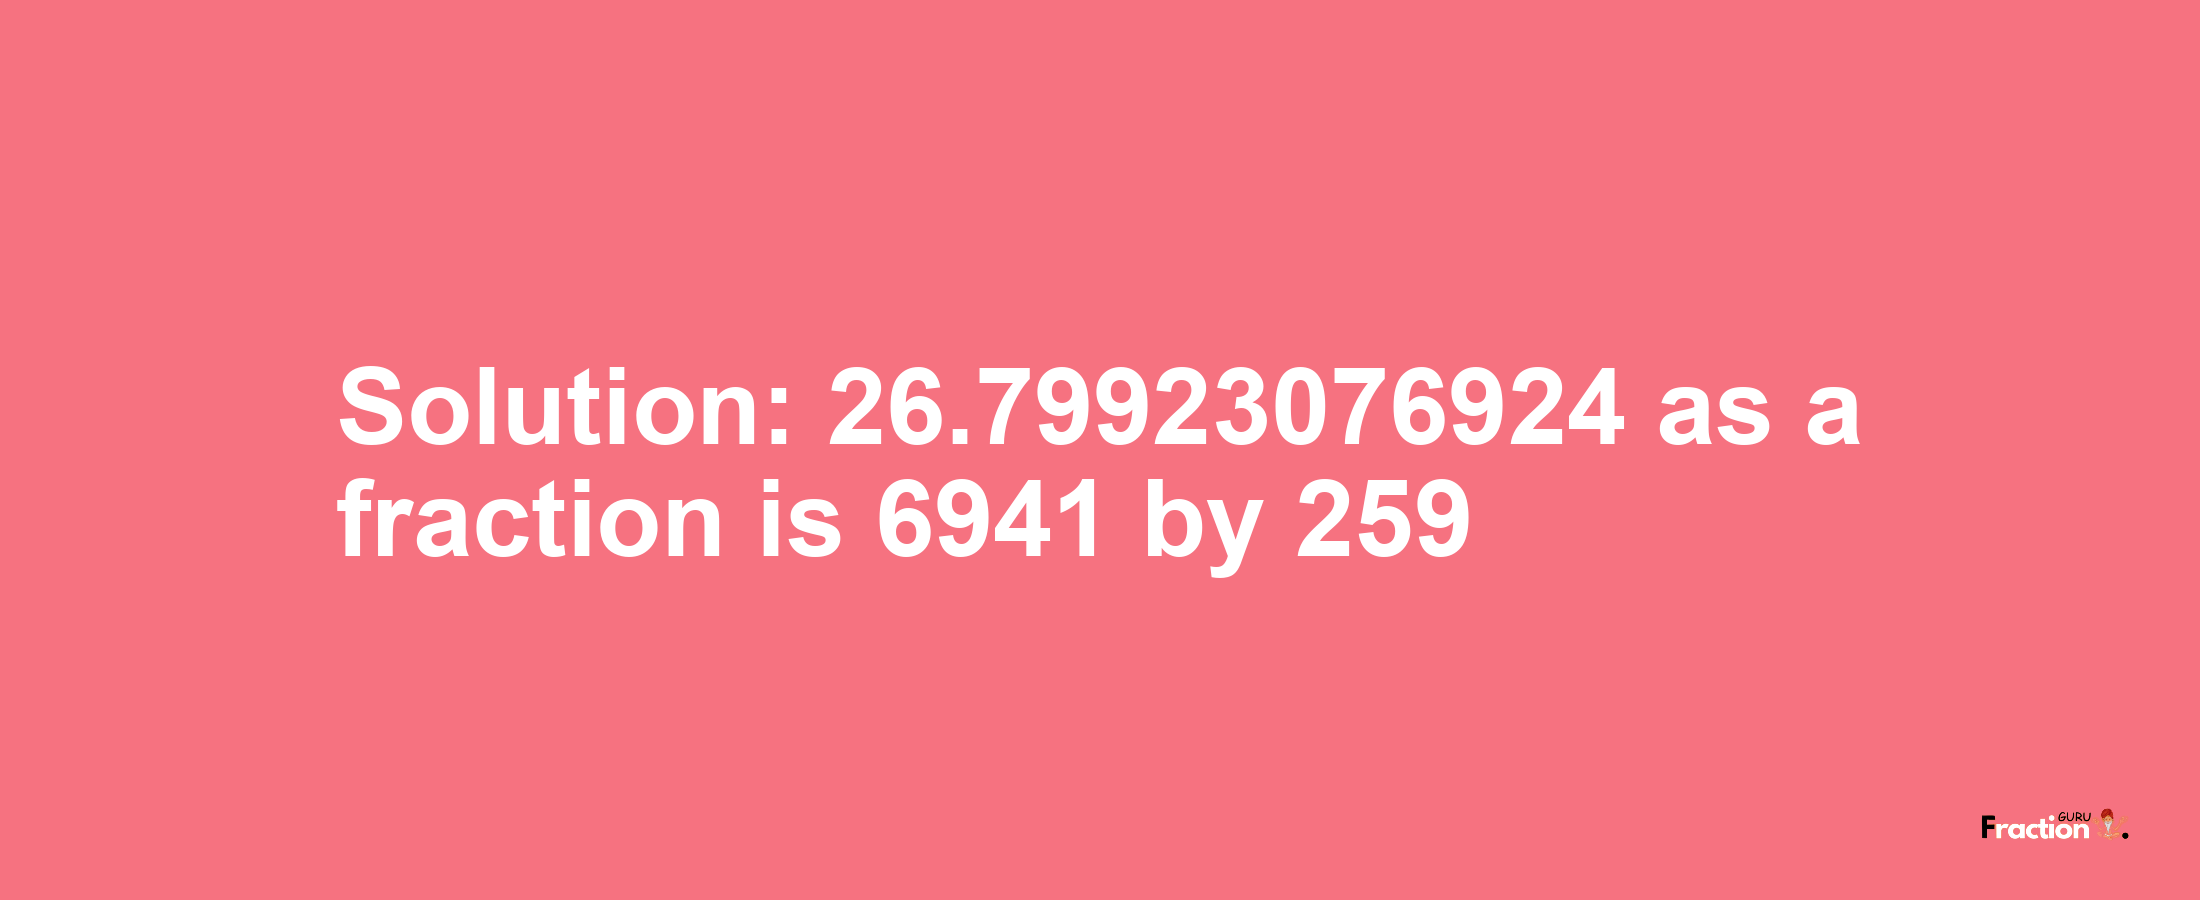 Solution:26.79923076924 as a fraction is 6941/259